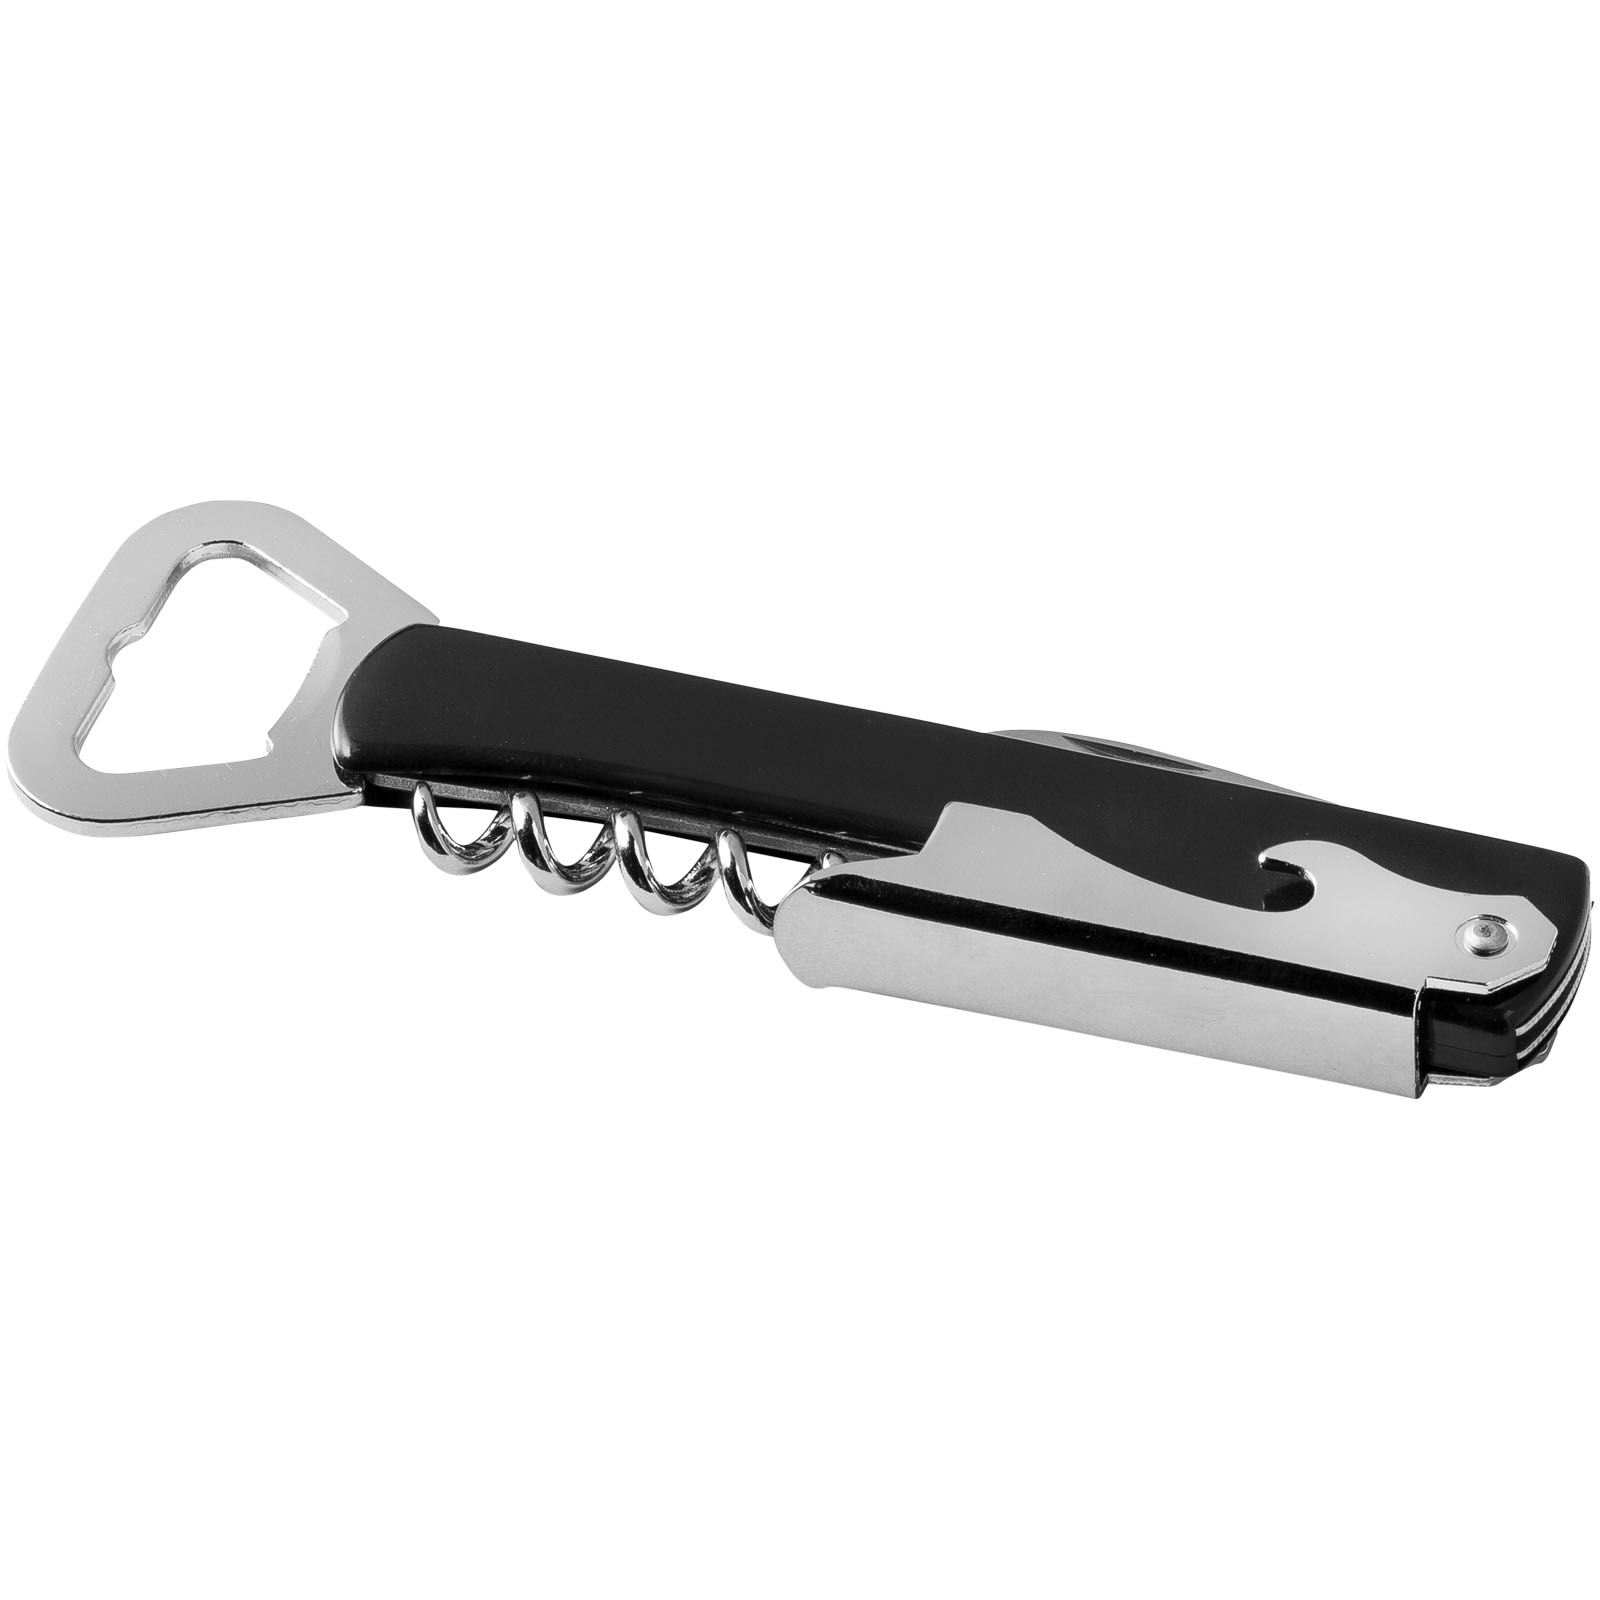 Waiter's knife OUST - solid black / silver